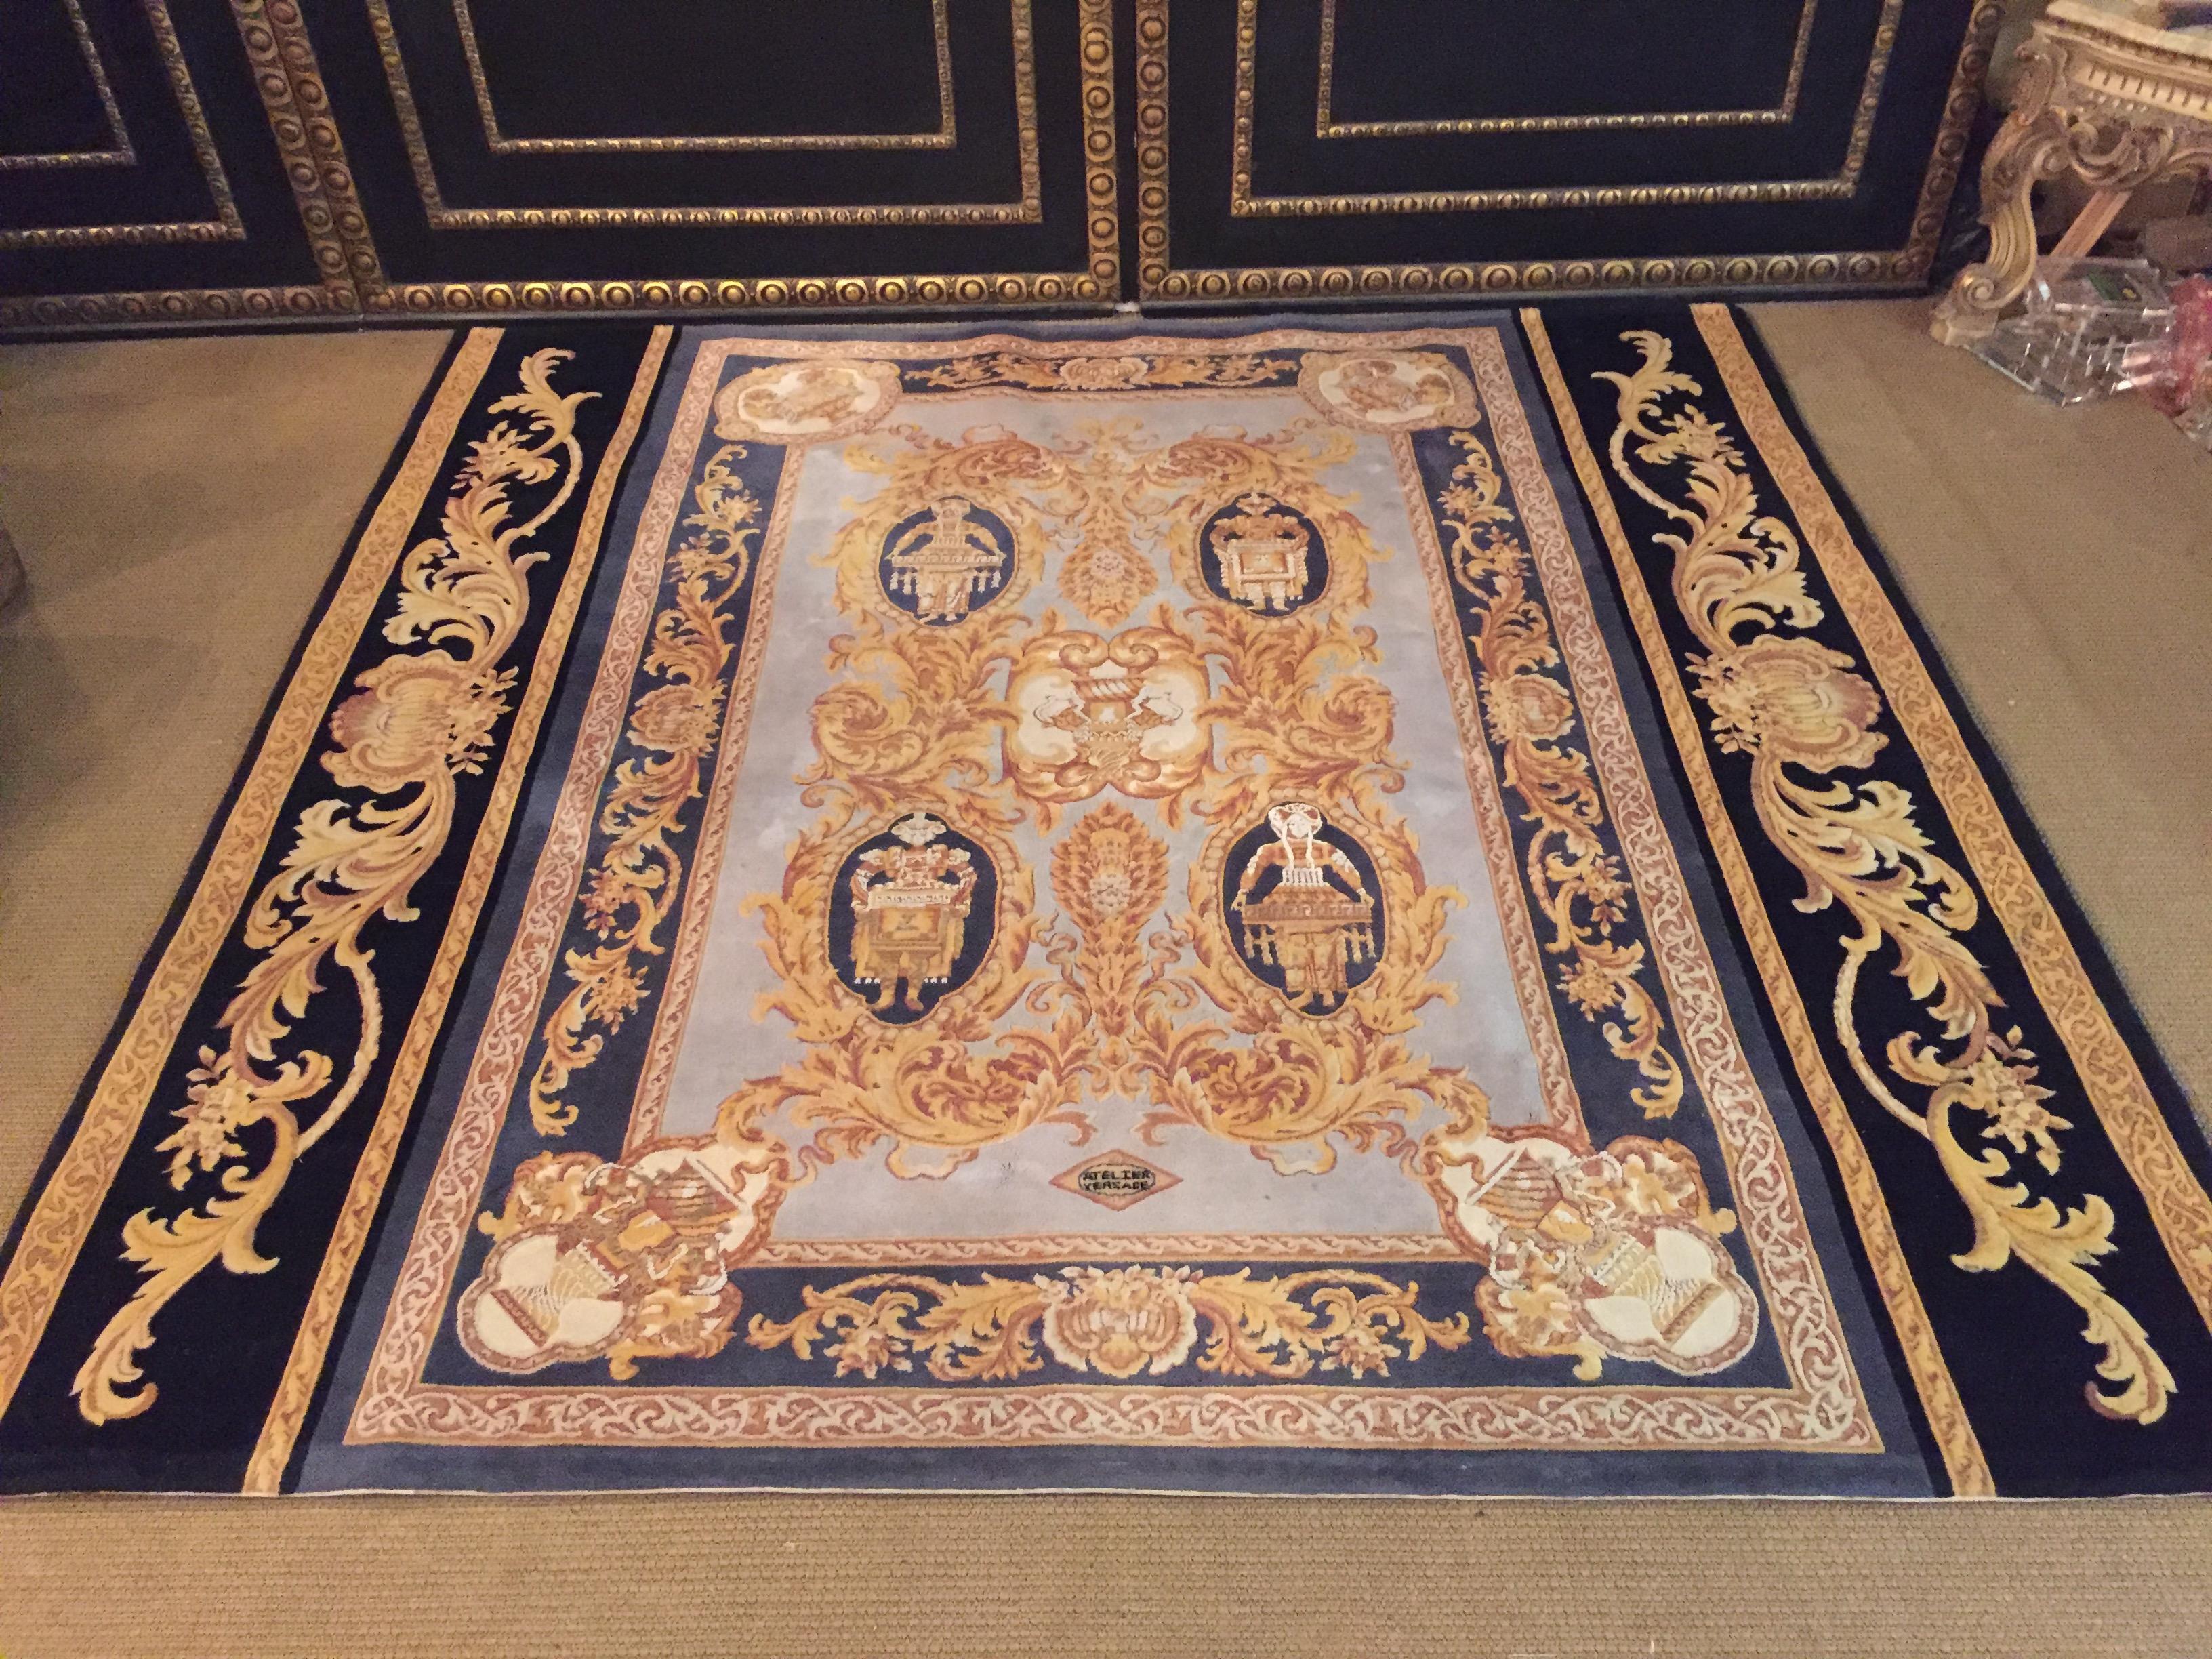 Unique Versace carpet with baroque pattern gold black.
in the middle are 4 different motifs.

Dimensions:
Lenght:200cm
Width:200cm.